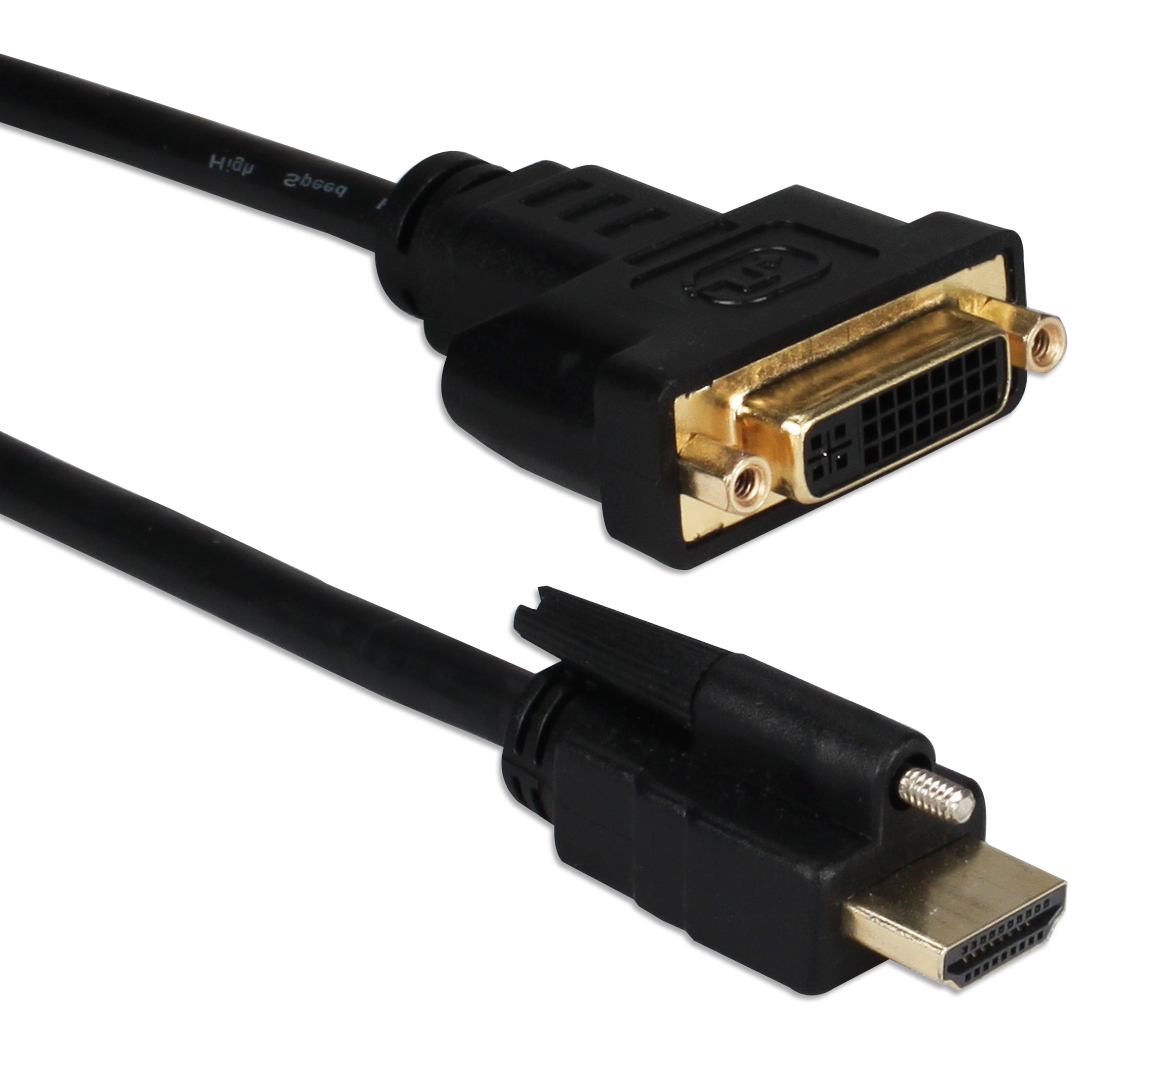 Cablecc DVI 24+1 Male ale to HDMI Female Adapter Converter Cable For PC Laptop HDTV 10cm